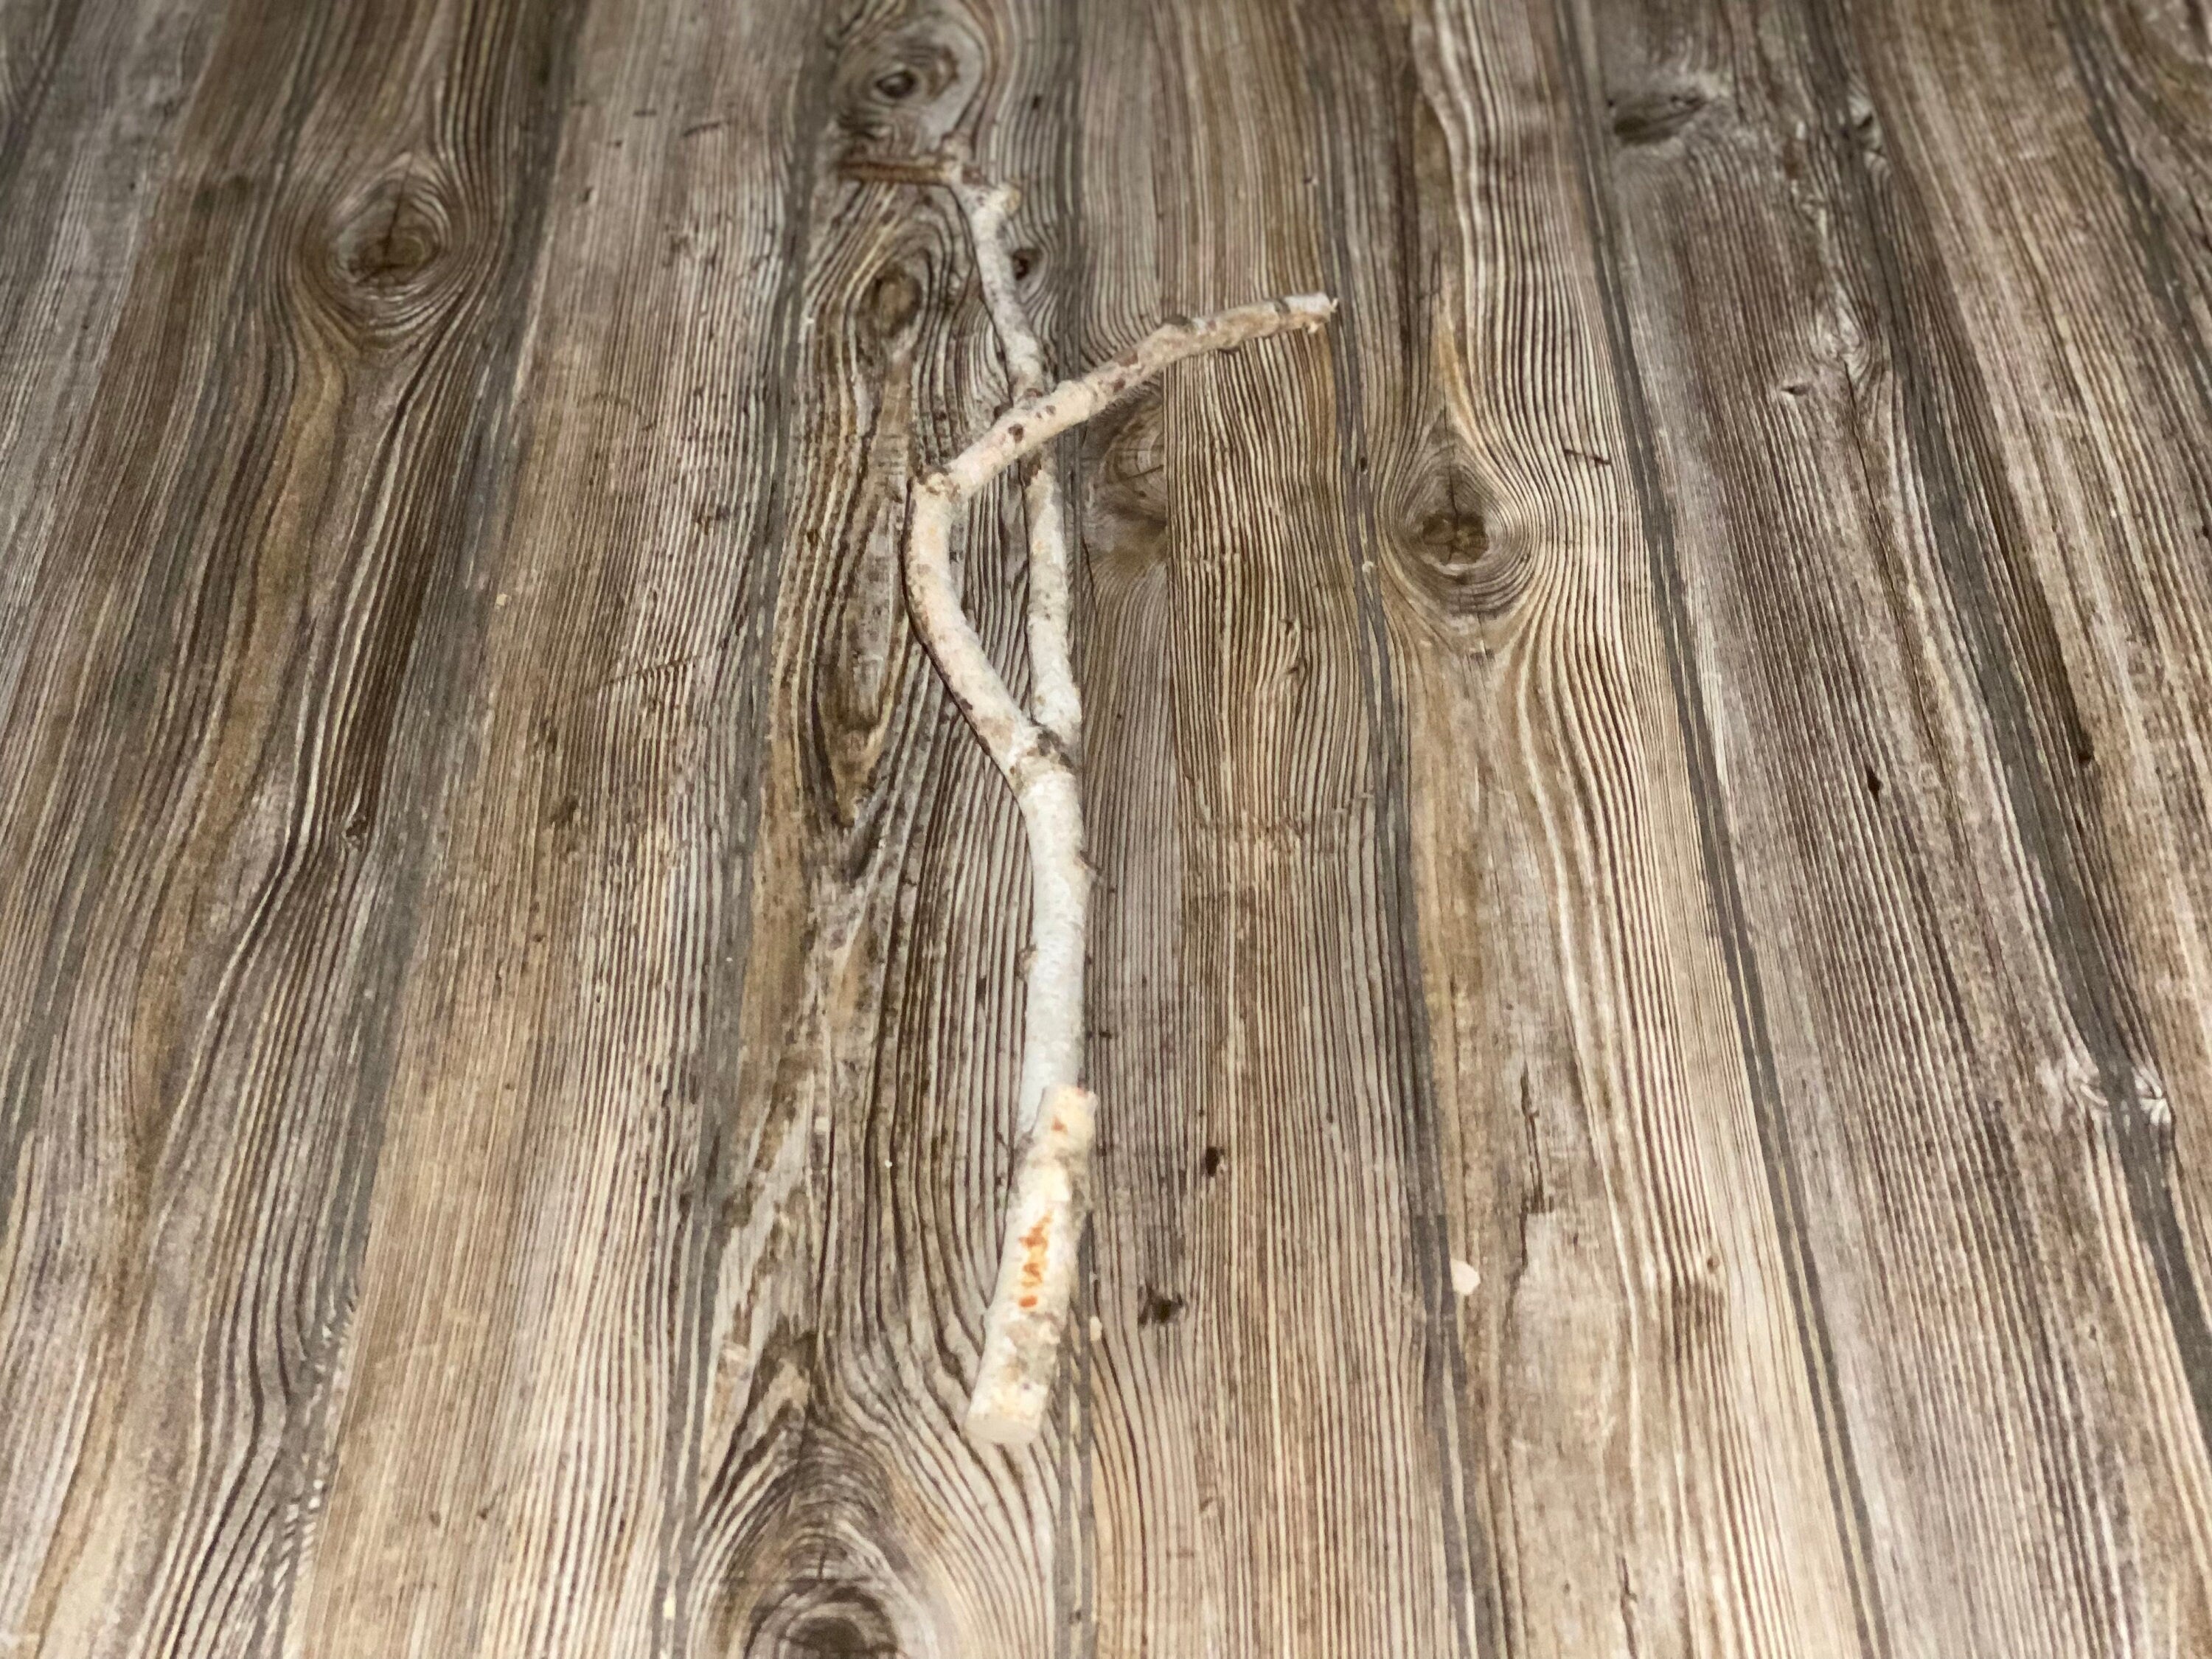 Twisted White Birch Branch, 1 Count, Approximately 23 Inches Long by 3/4 Inch Thick